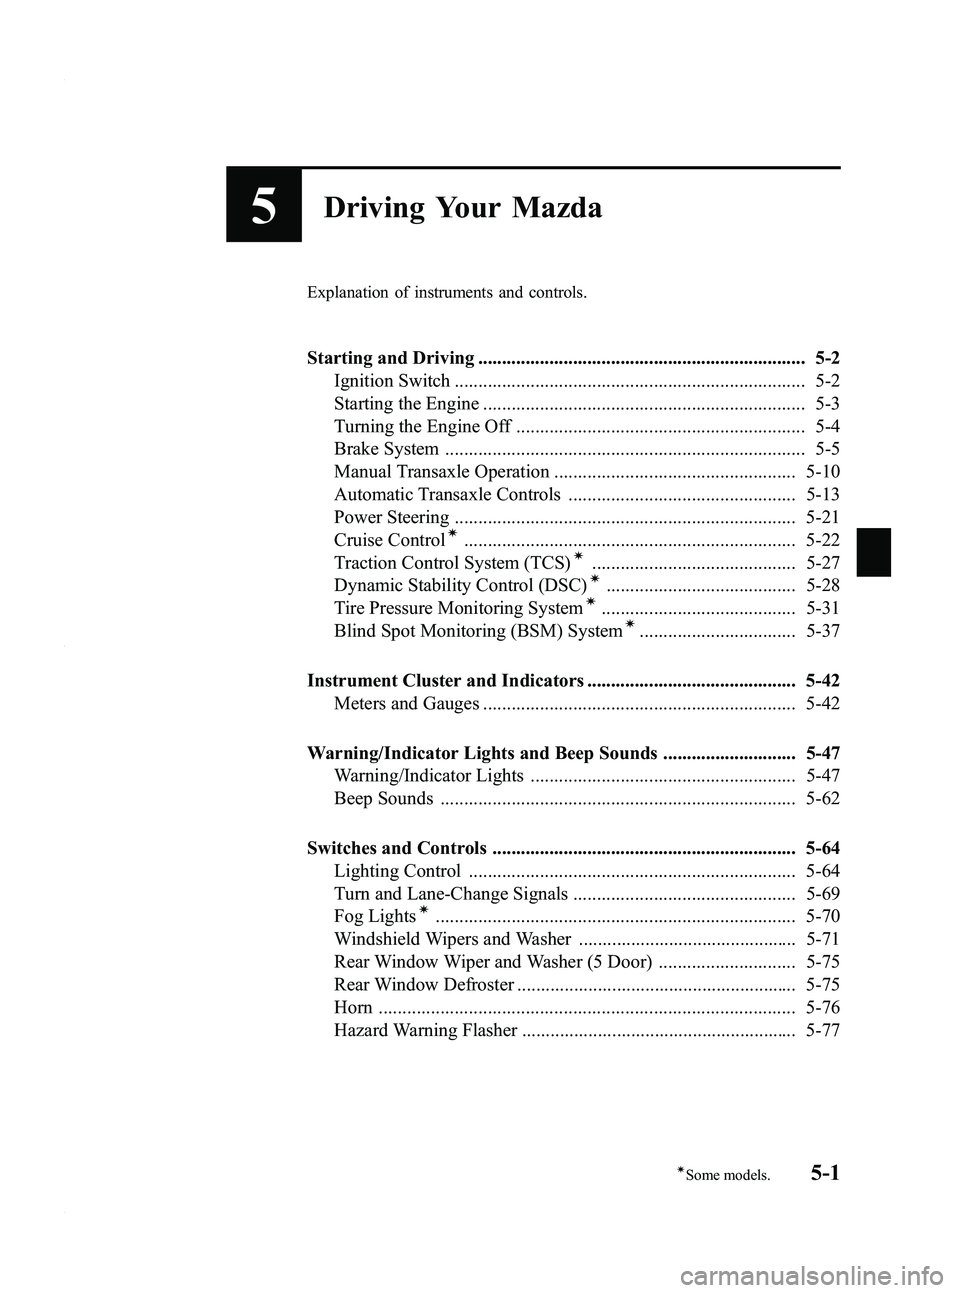 MAZDA MODEL 3 5-DOOR 2012  Owners Manual Black plate (165,1)
5Driving Your Mazda
Explanation of instruments and controls.
Starting and Driving ..................................................................... 5-2Ignition Switch .........